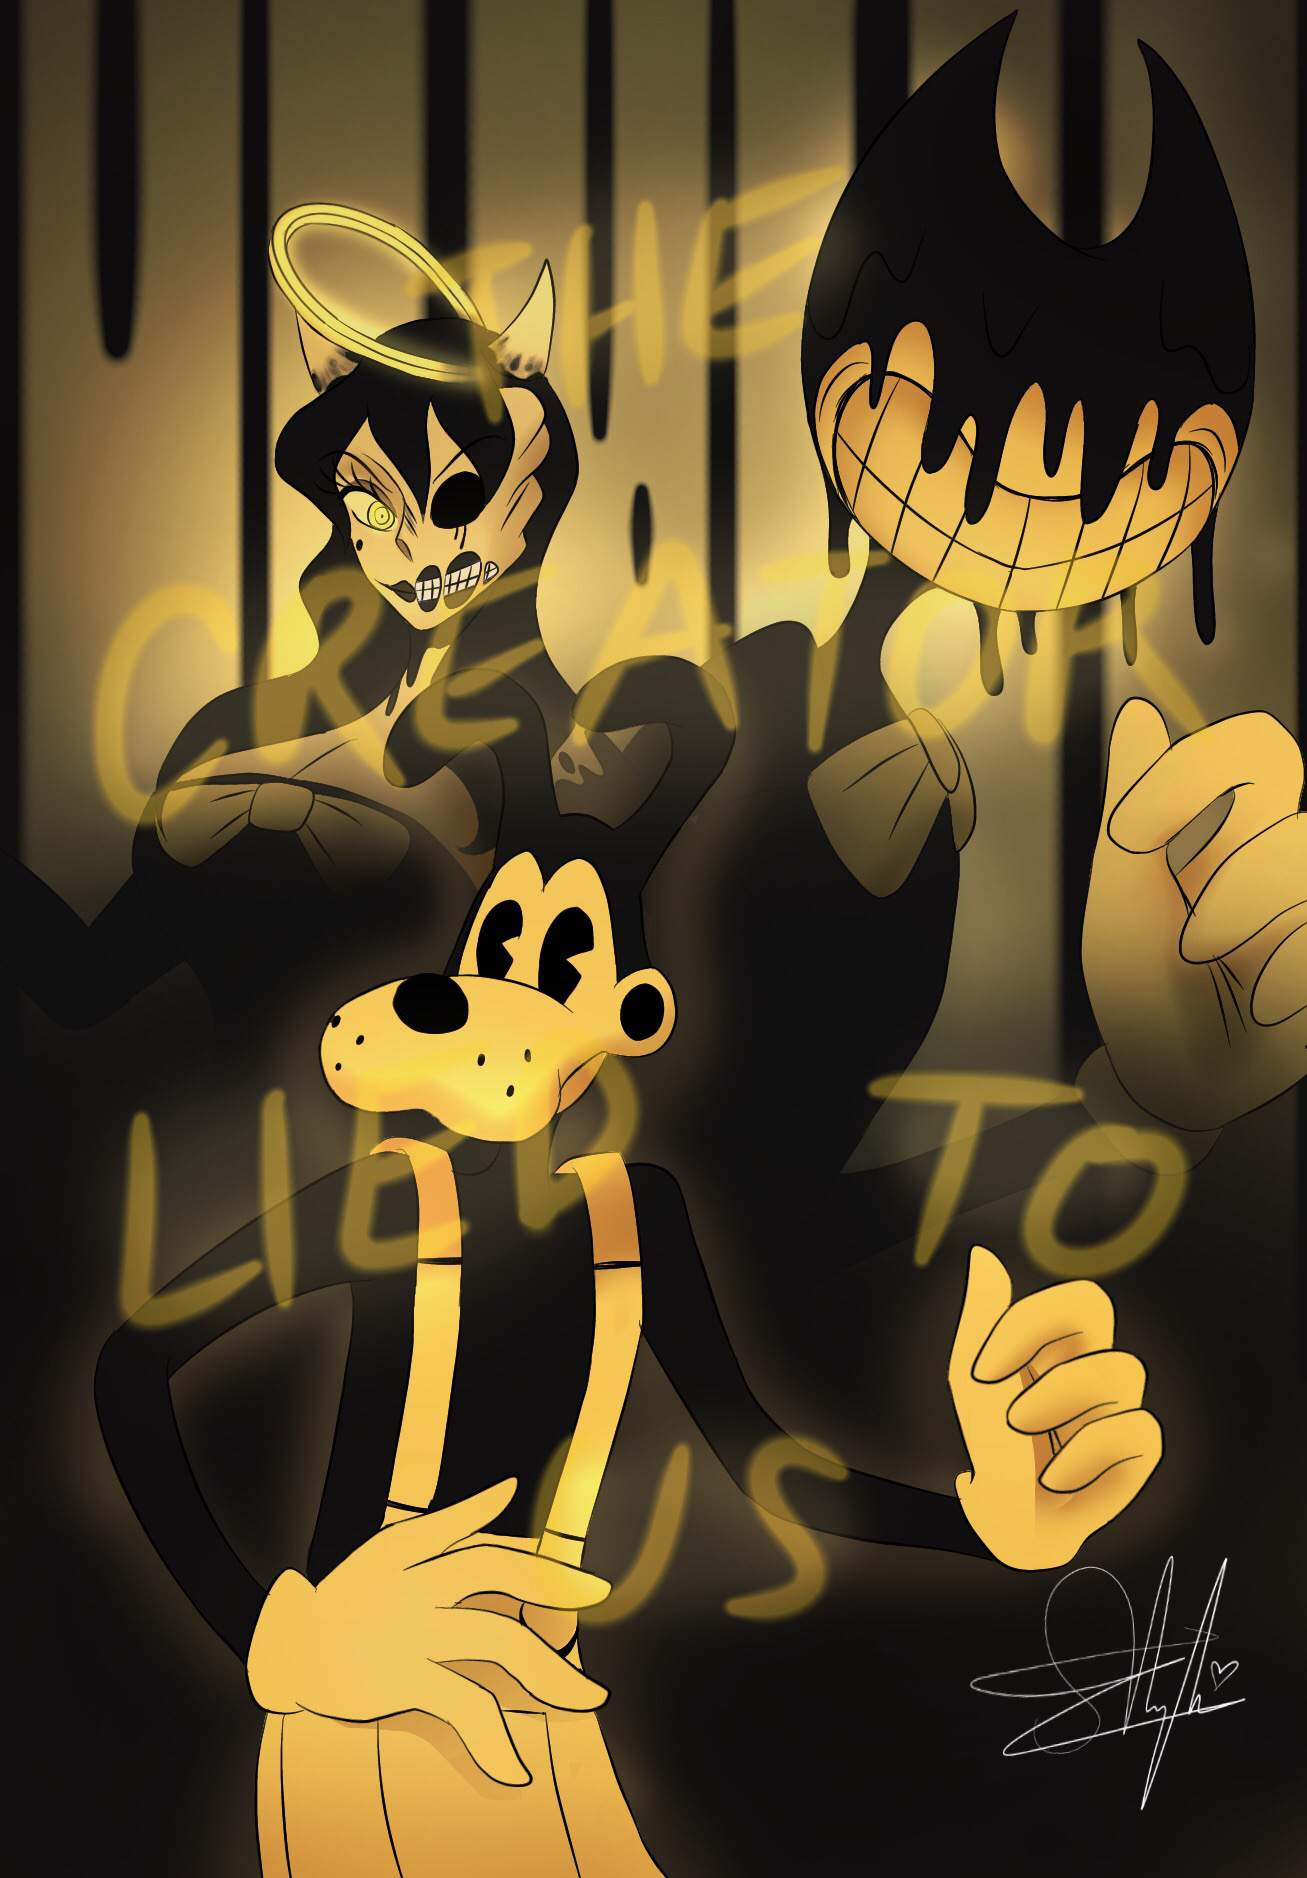 get bendy and the ink machine for free